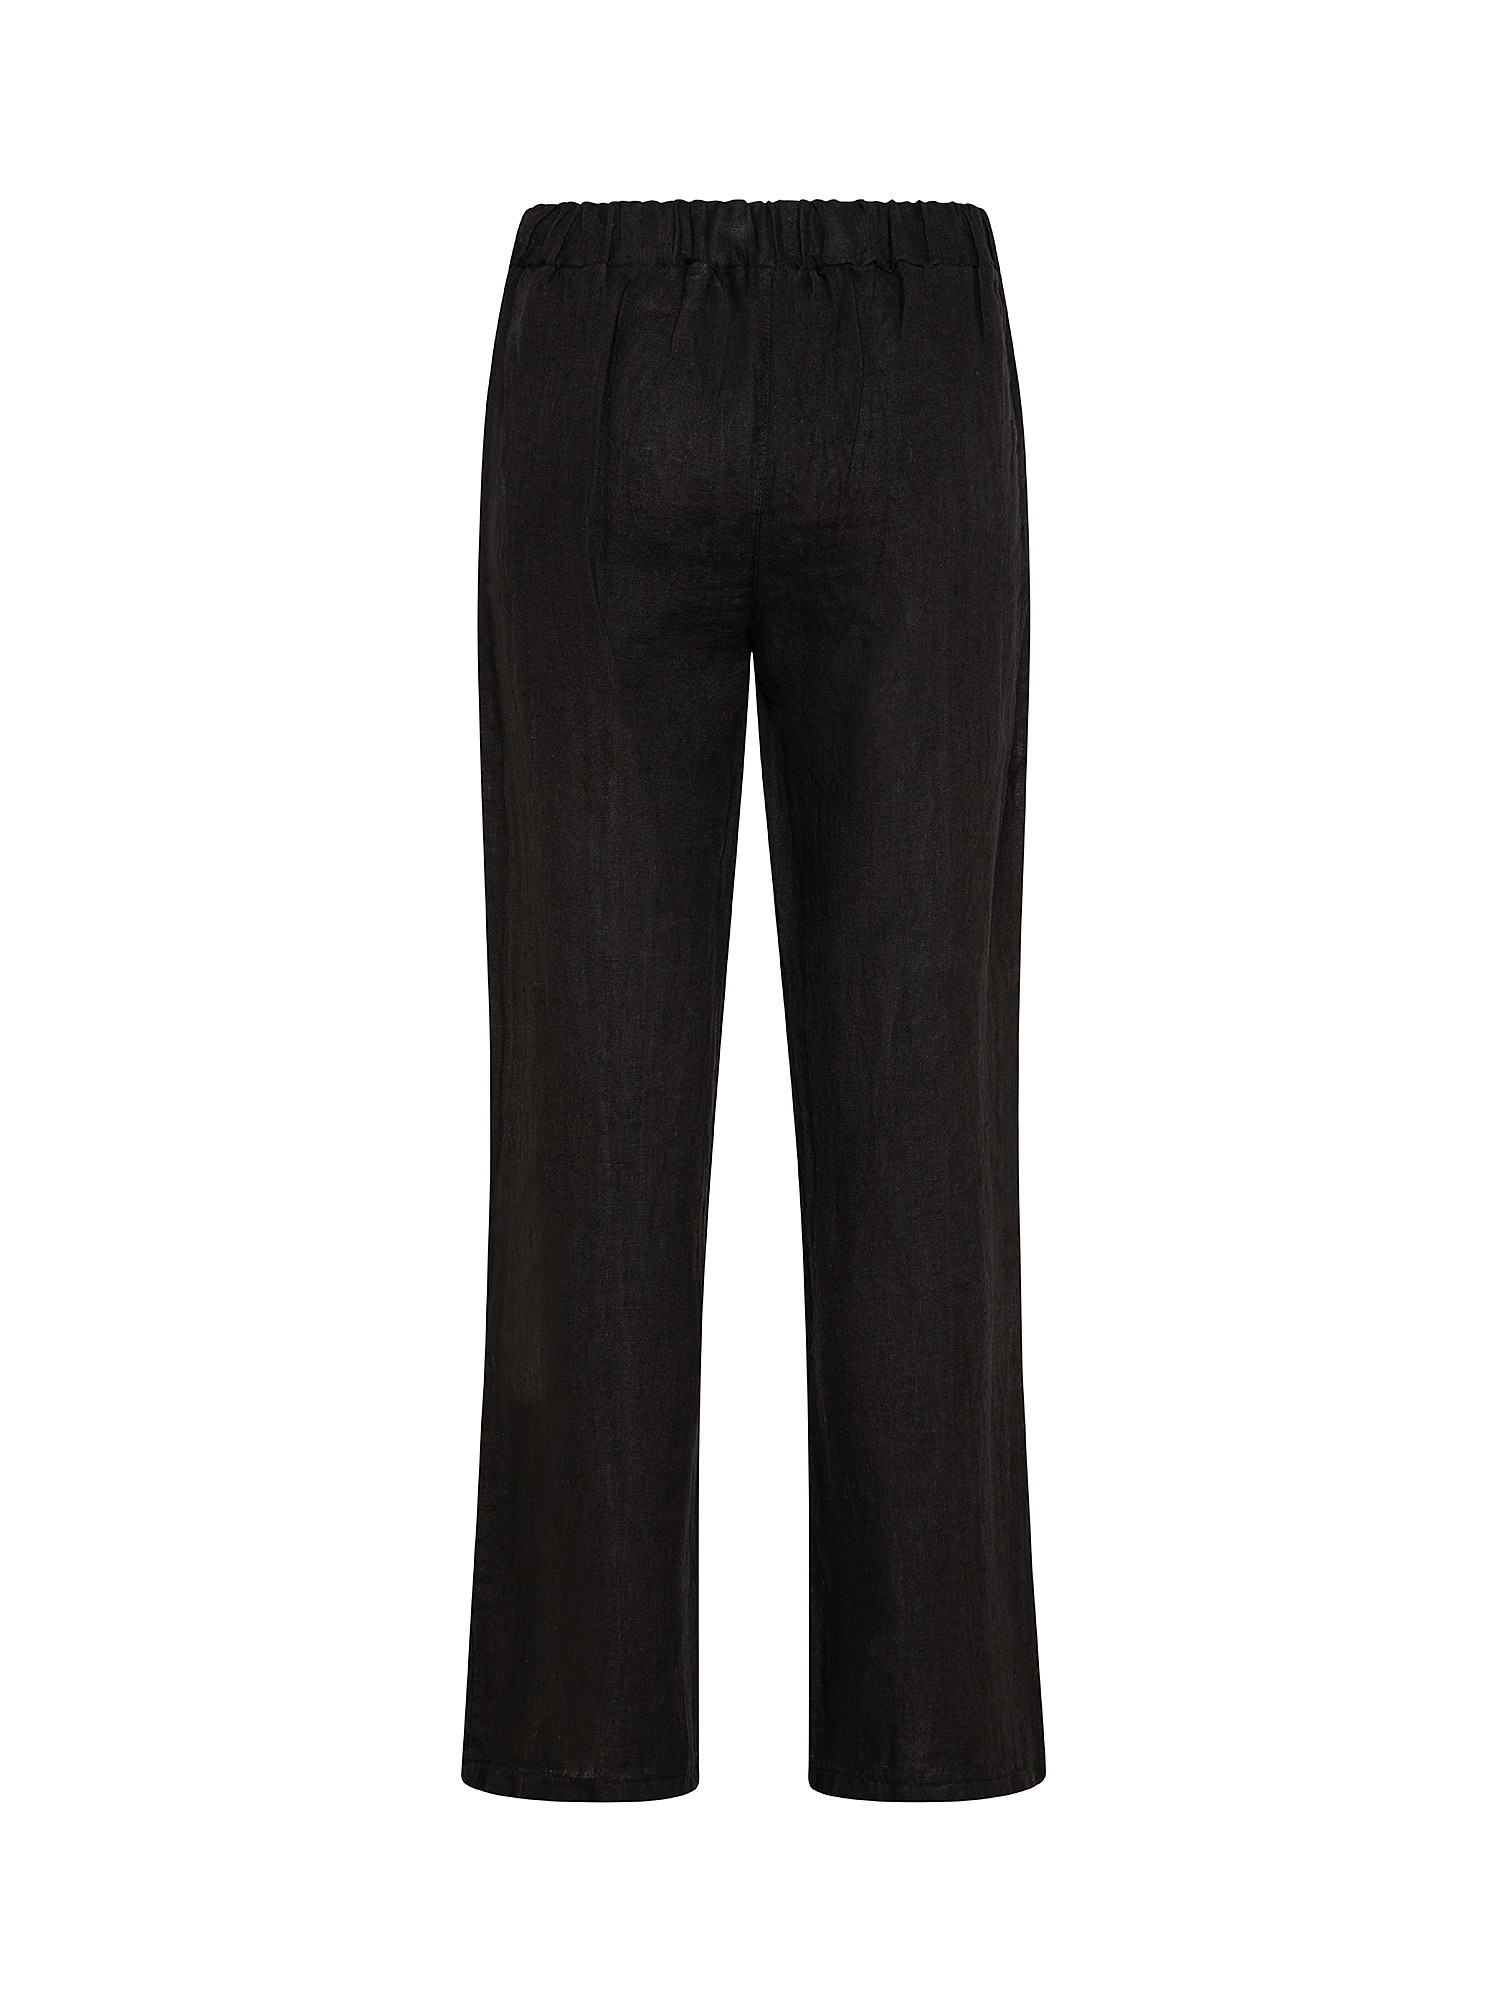 Pure linen trousers with slit, Black, large image number 1